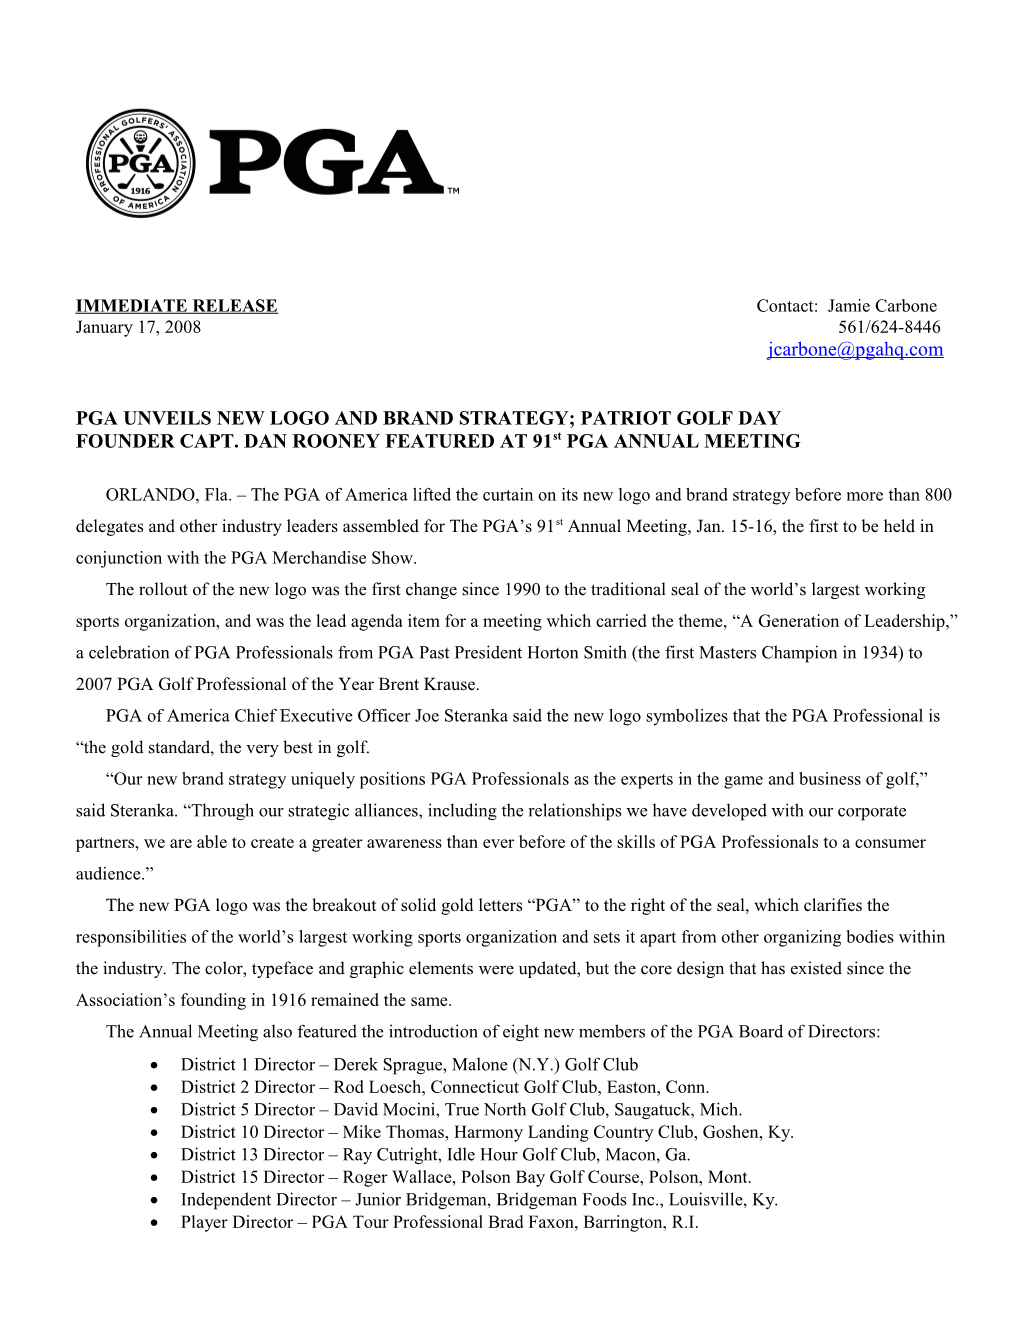 Pga Unveils New Logo and Brand Strategy; Patriot Golf Day